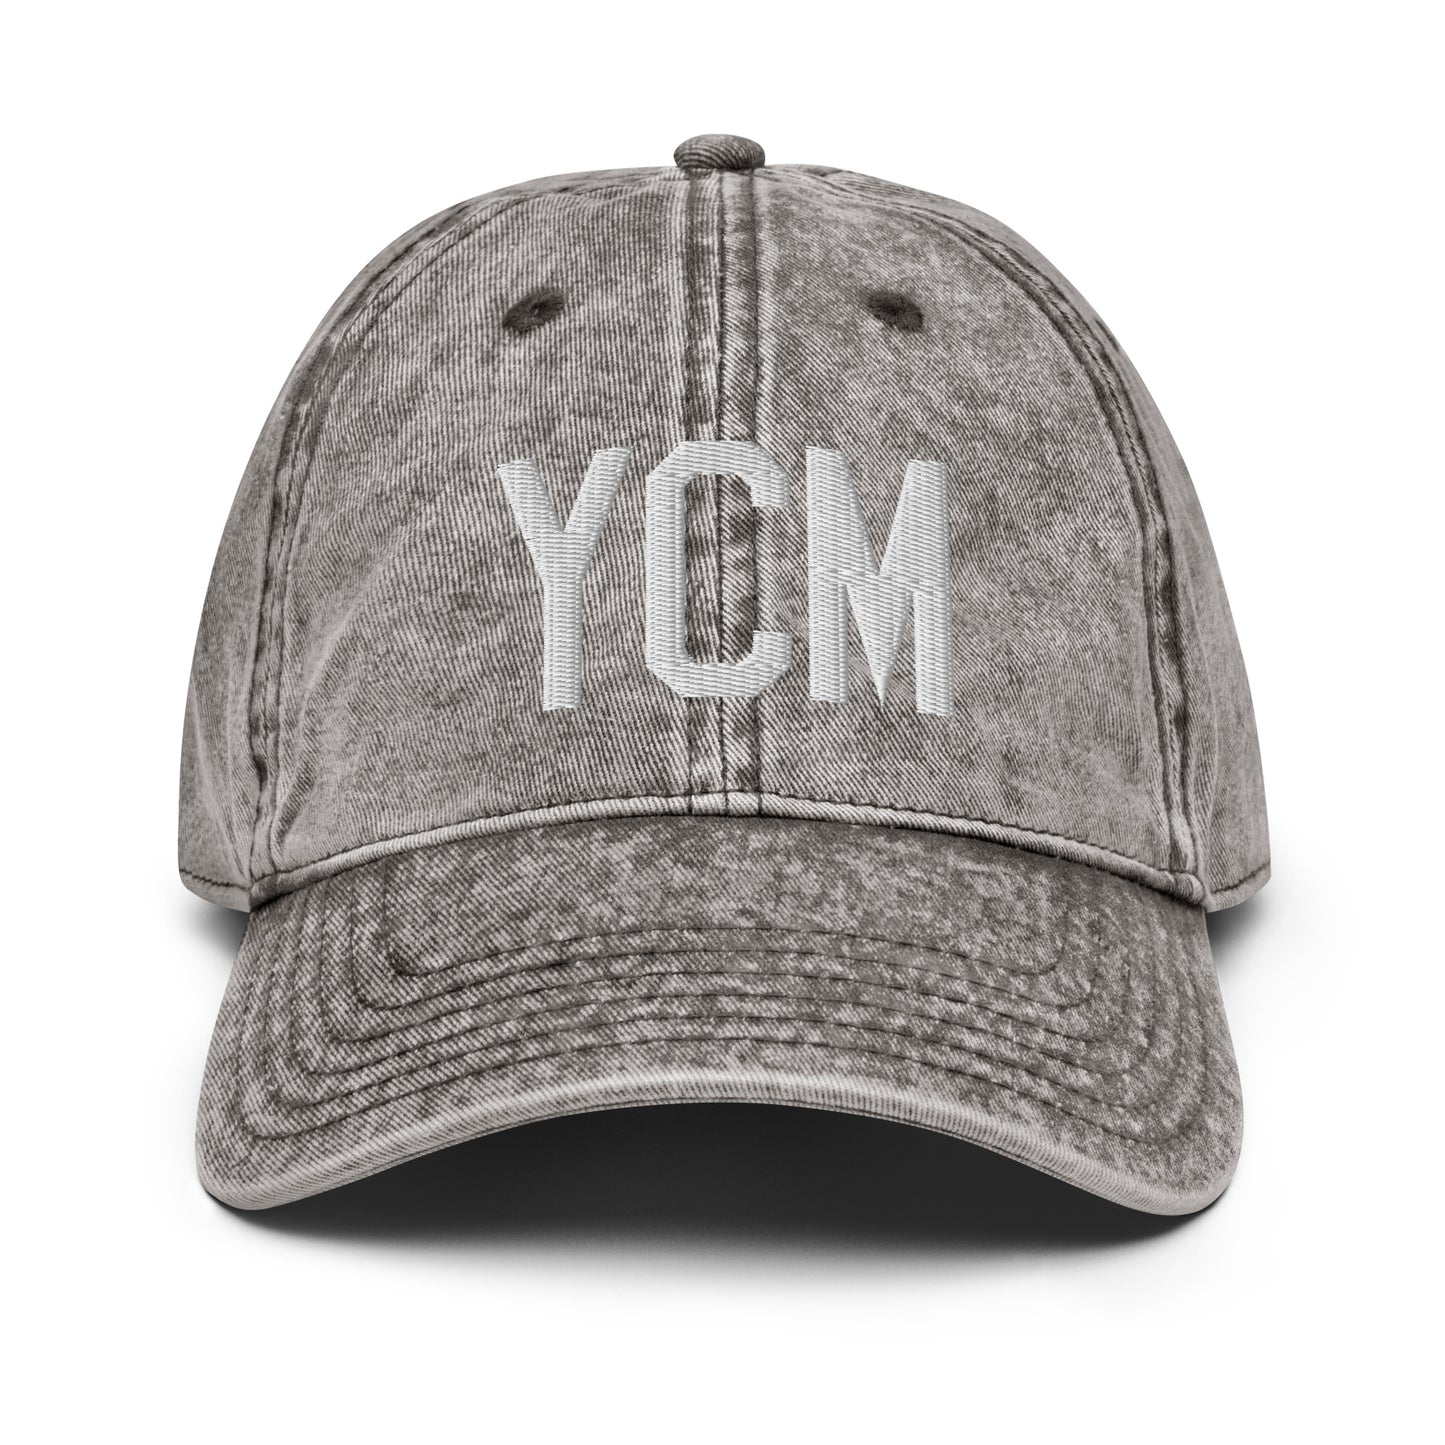 Airport Code Twill Cap - White • YCM St. Catharines • YHM Designs - Image 28